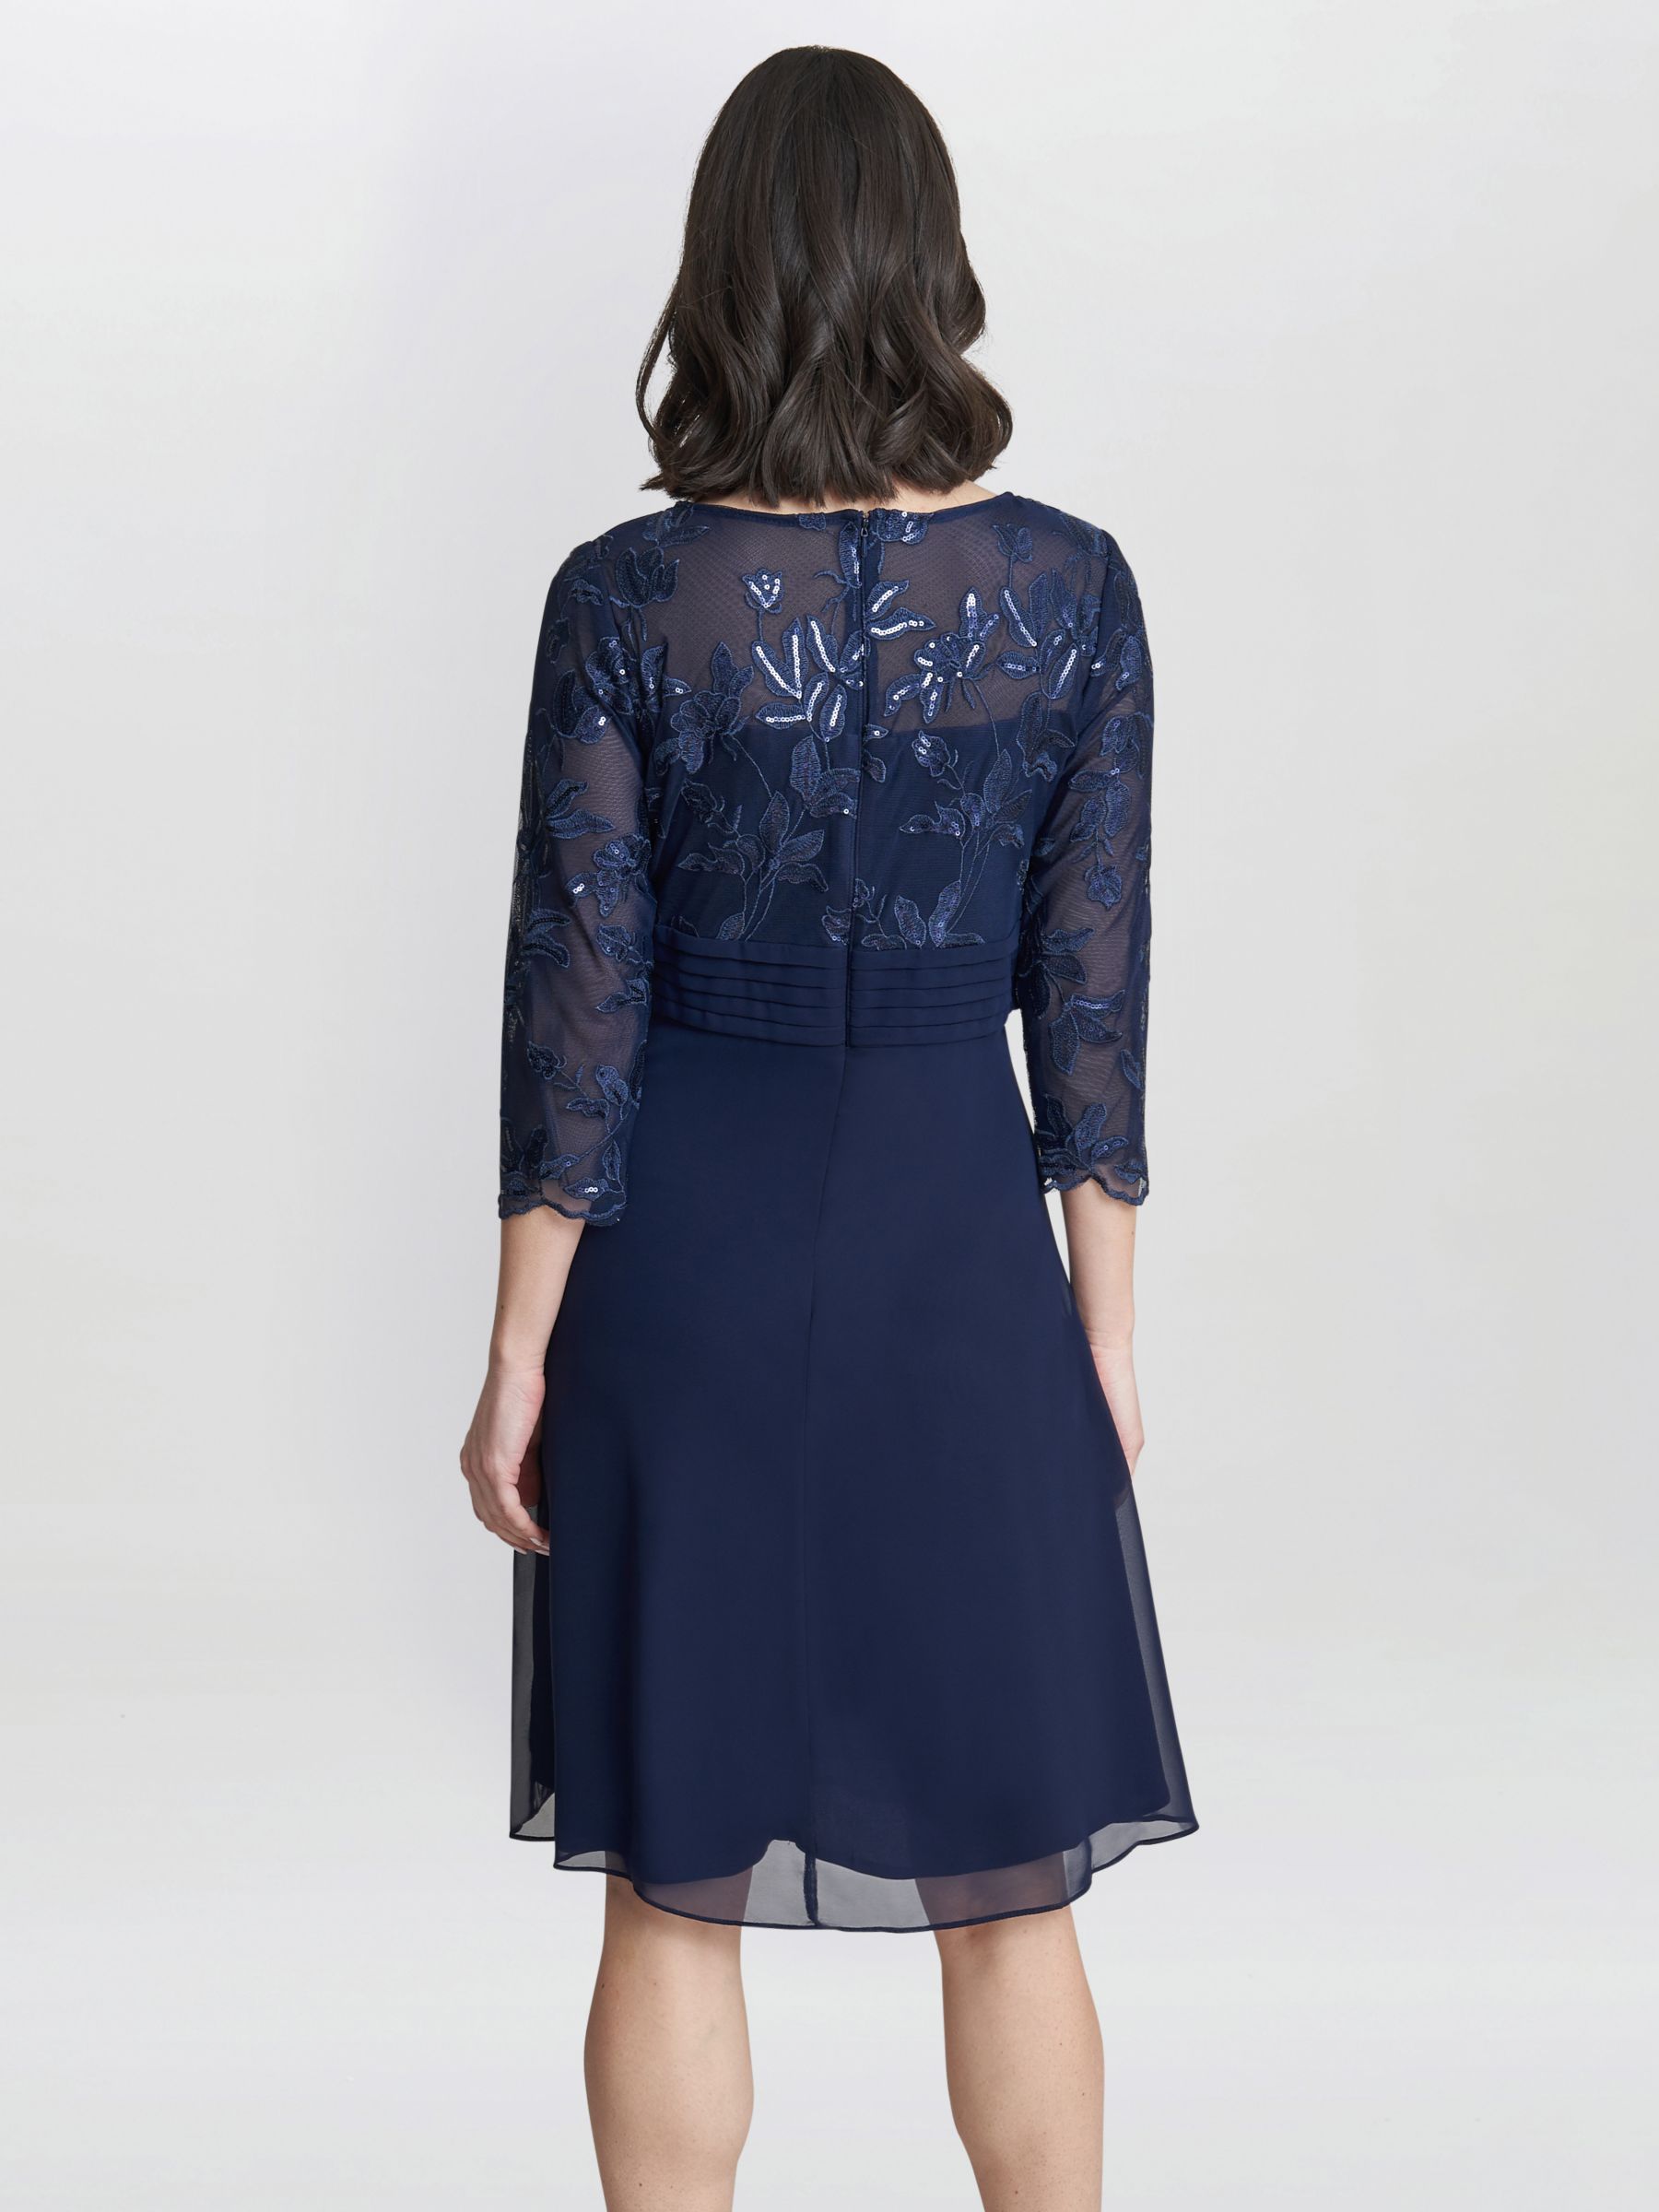 Gina Bacconi Petite Thandie Embroidered Bodice Dress, Navy, 8